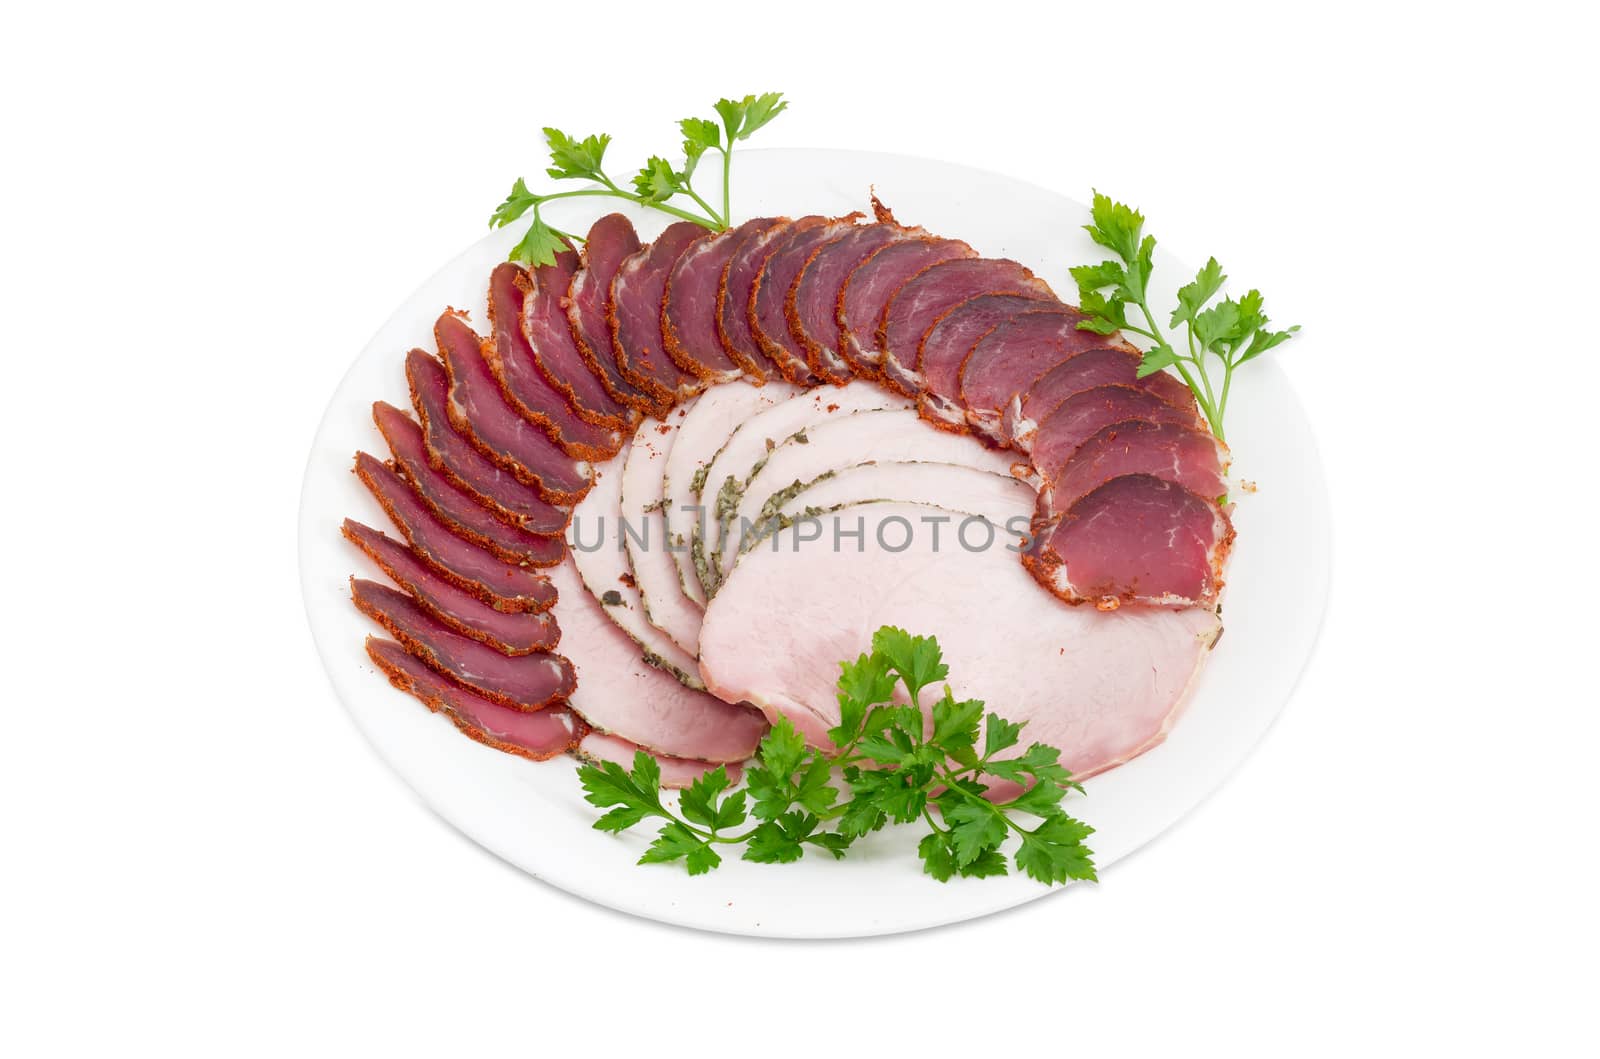 Sliced dried pork tenderloin and ham with twigs of parsley on a white dish on a light background 
